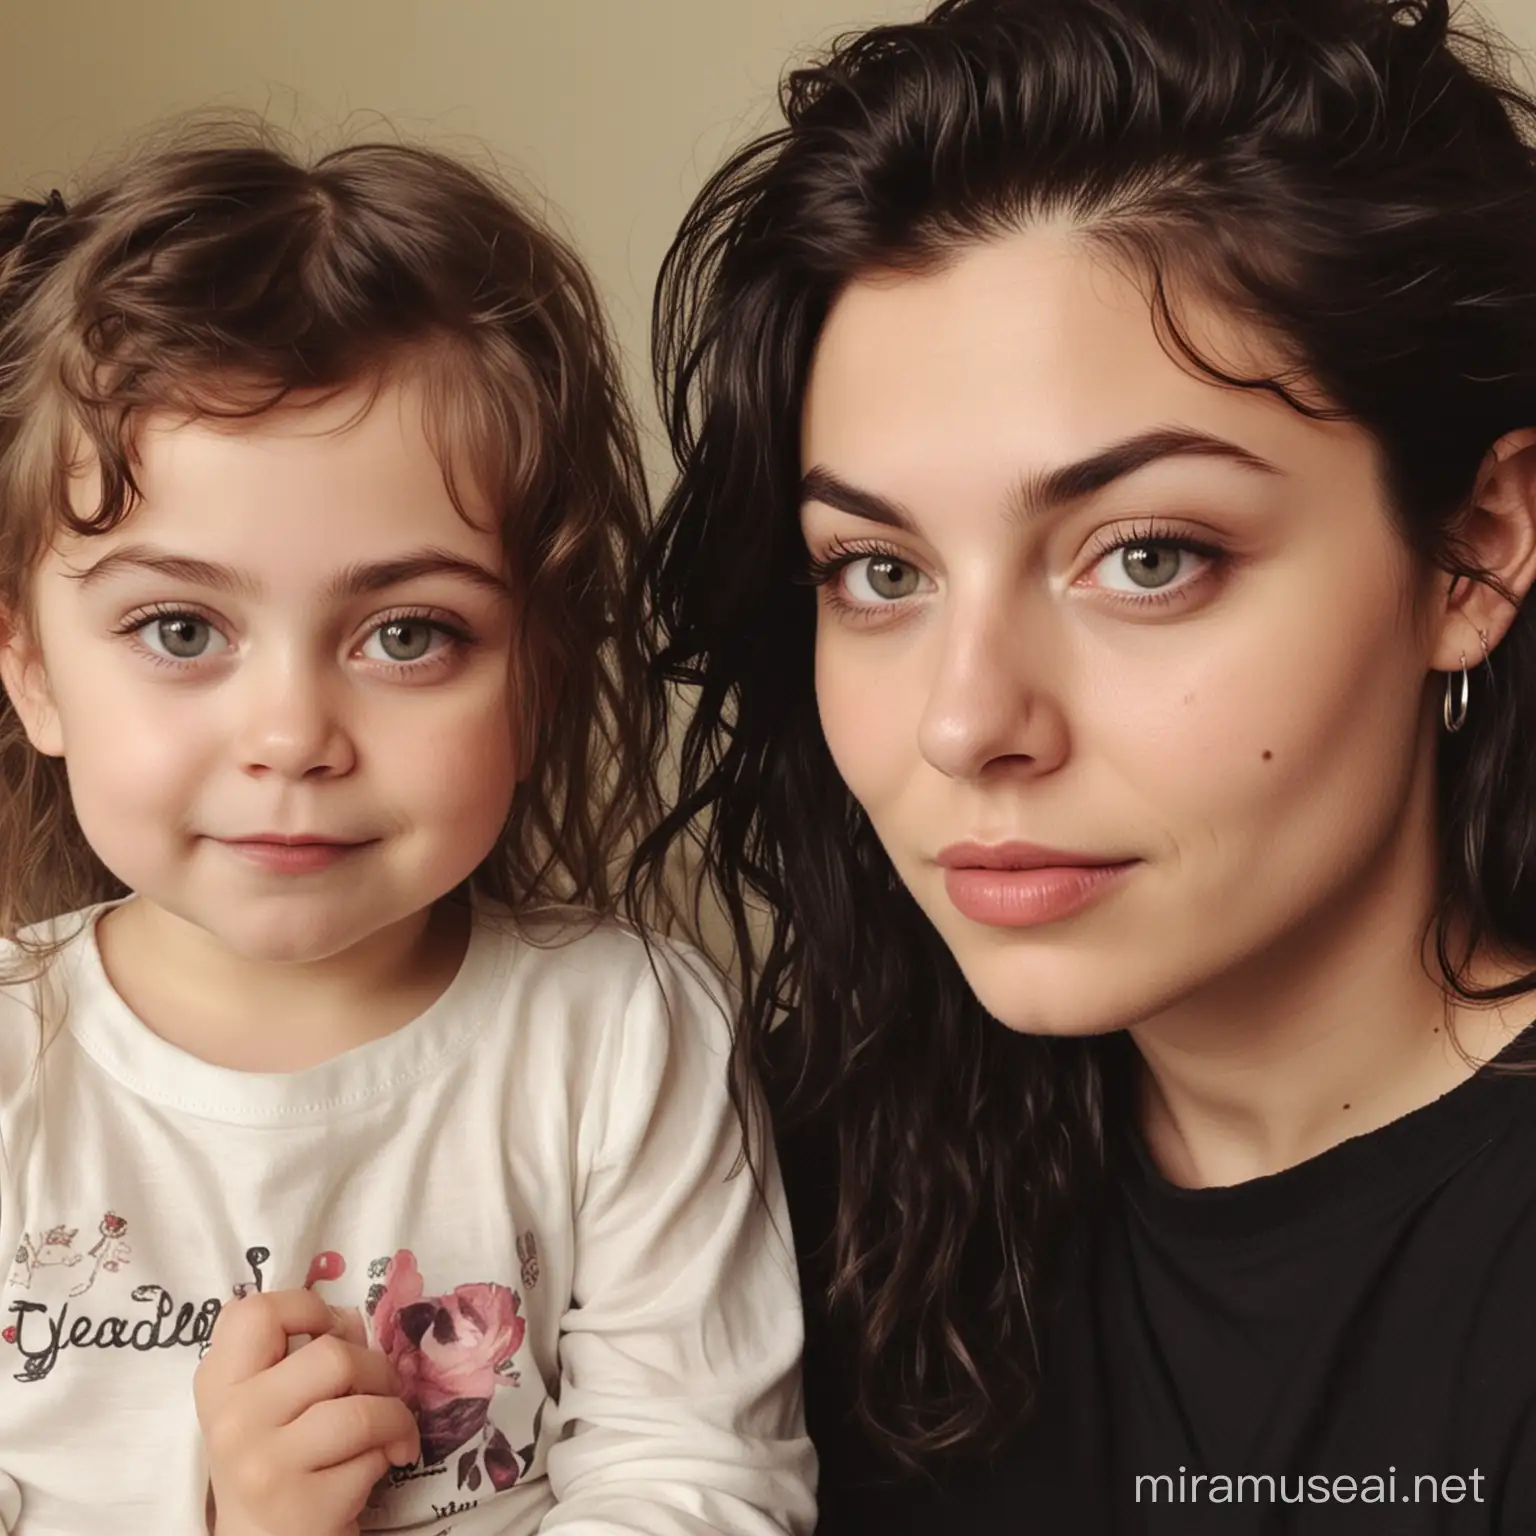 A three year old girl, she has dark curly hair, she looks Harry Styles and Frances bean Cobain,  she is next to her mother